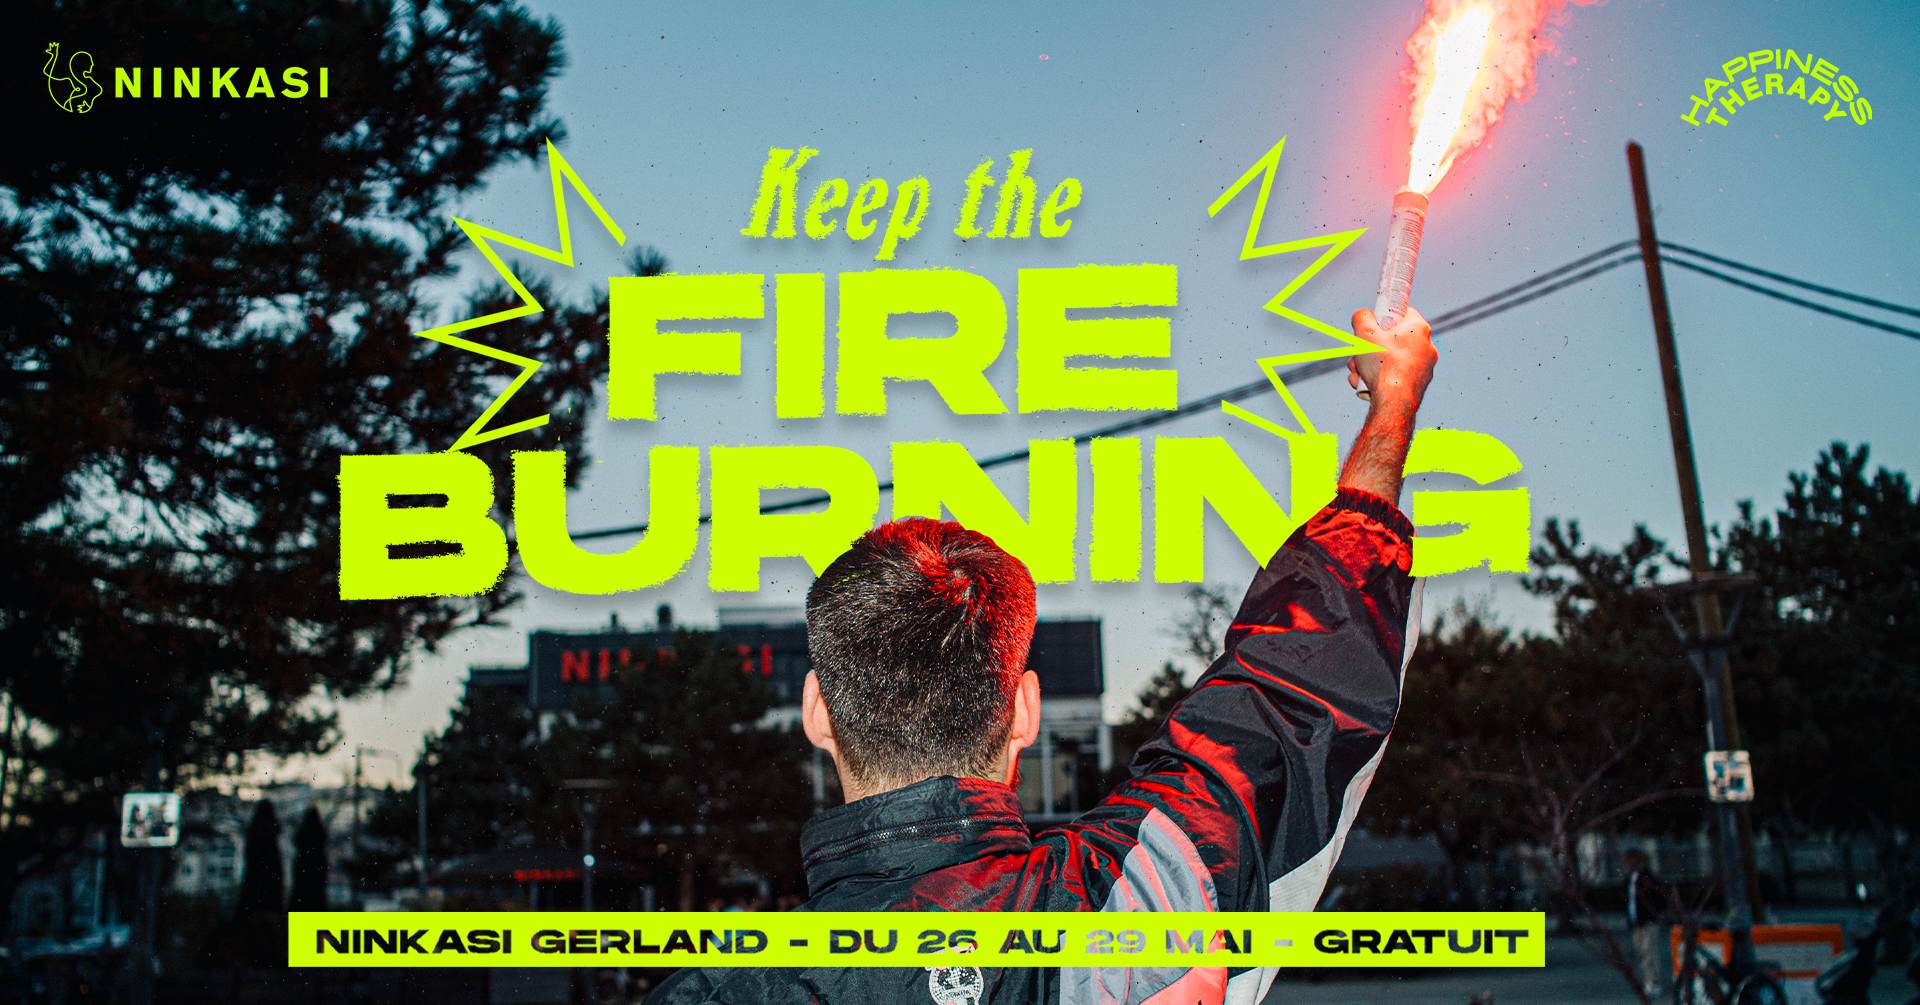 Open Air Gratuit - Happiness Therapy x Ninkasi: Keep The Fire Burning - フライヤー表